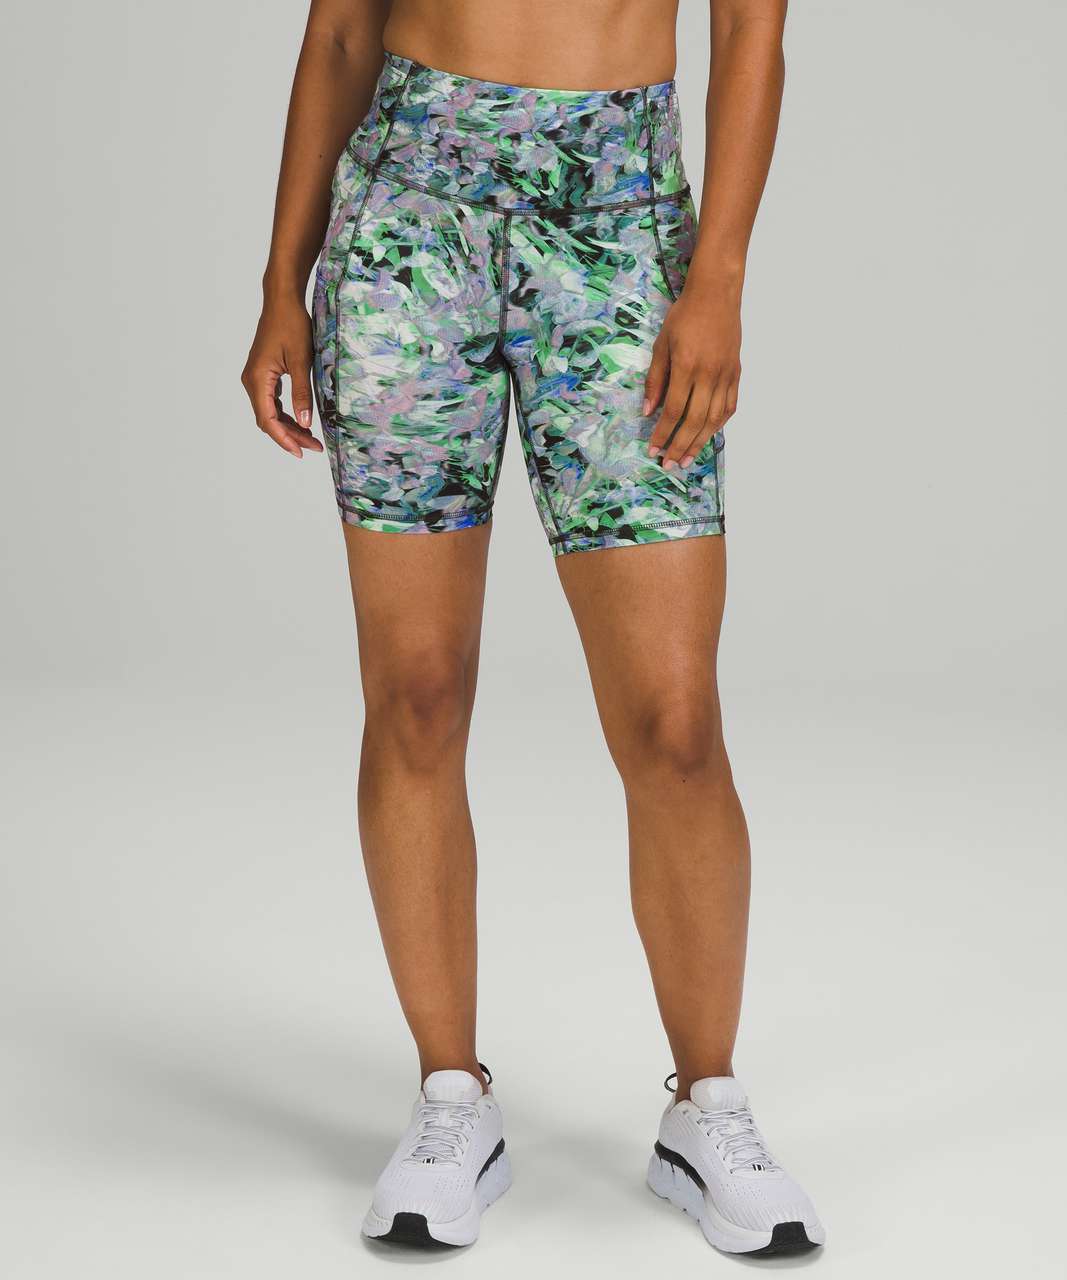 Lululemon athletica Fast and Free 2-in-1 High-Rise Short 3 *Reflective, Women's Shorts